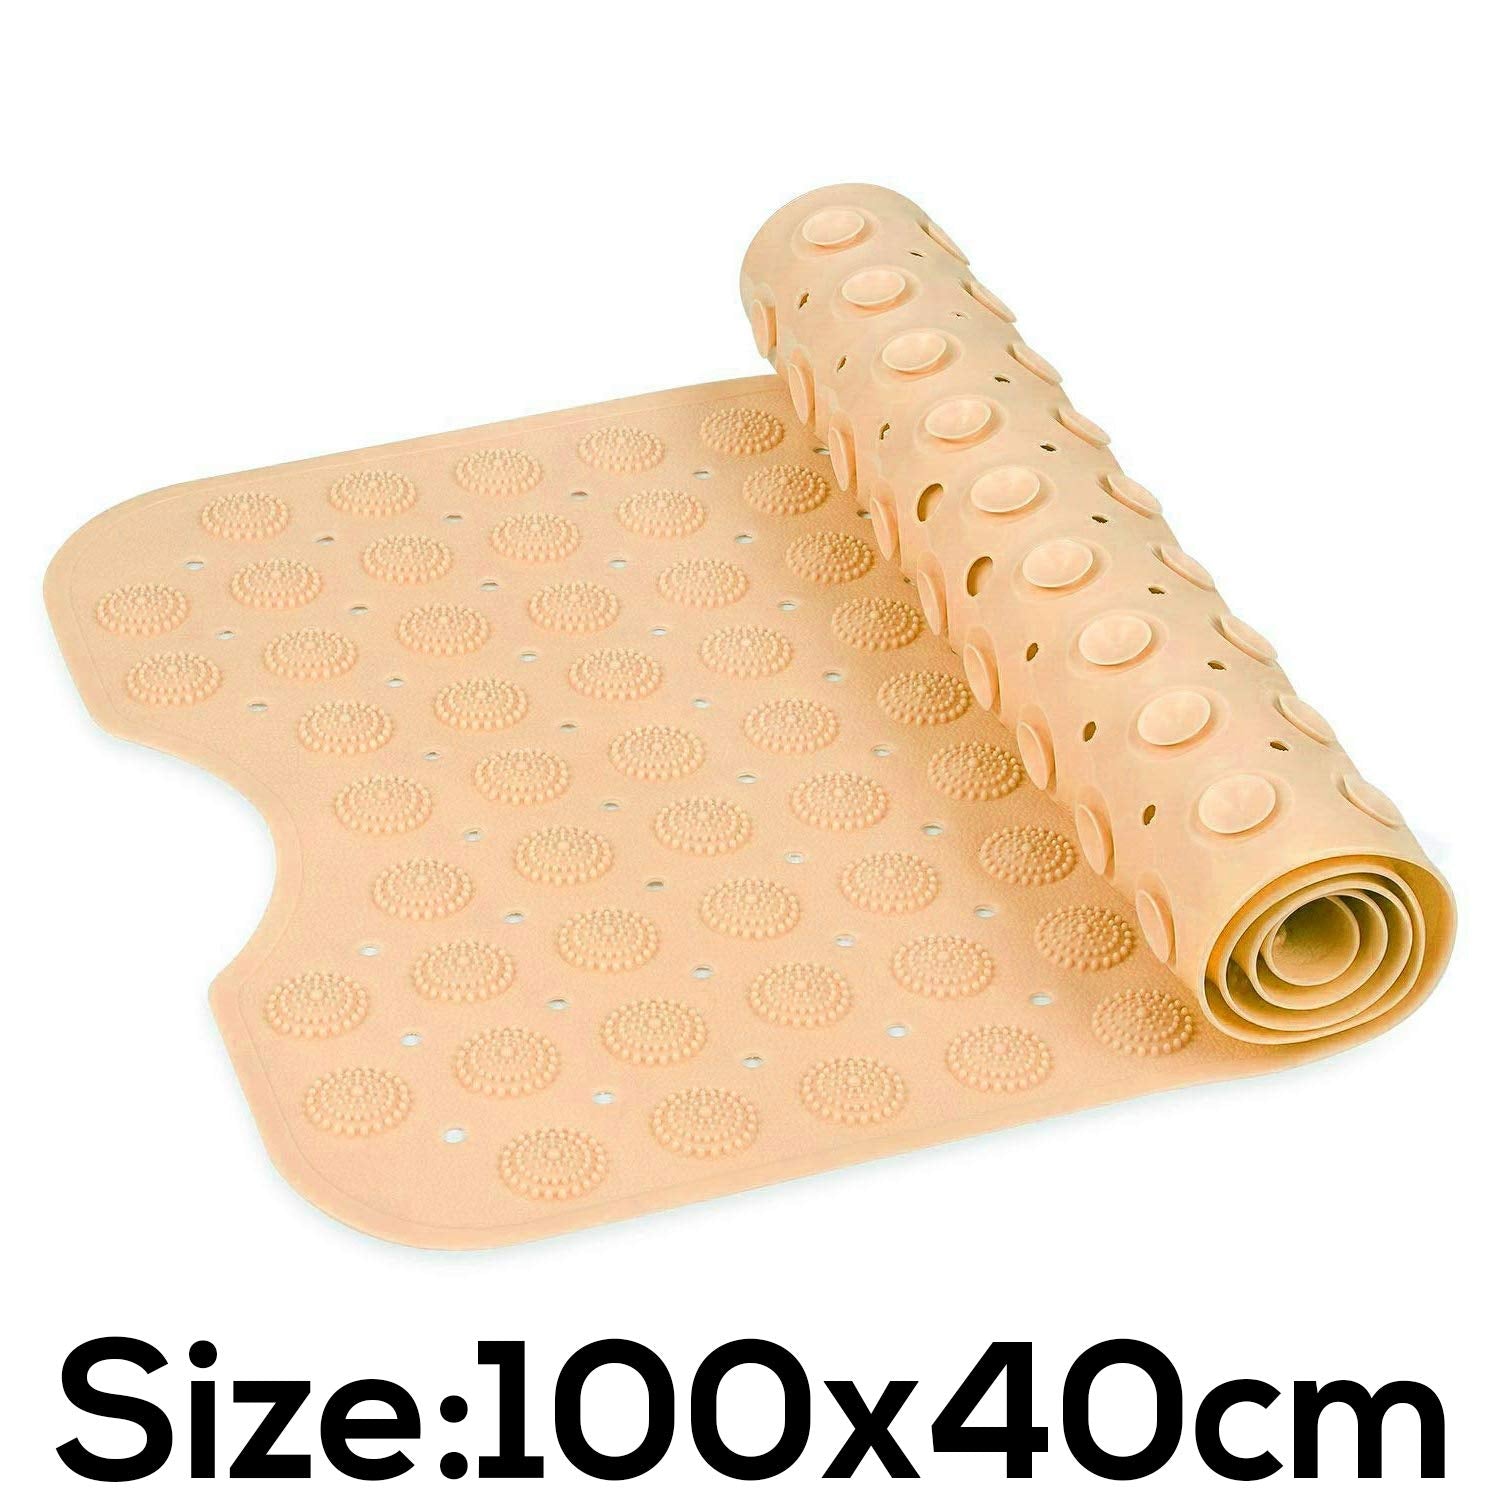 Experia Anti Slip with Suction cup Bath Mat - 100 x 40 cm (Cream Color with Accu-Pebble) LifeKrafts